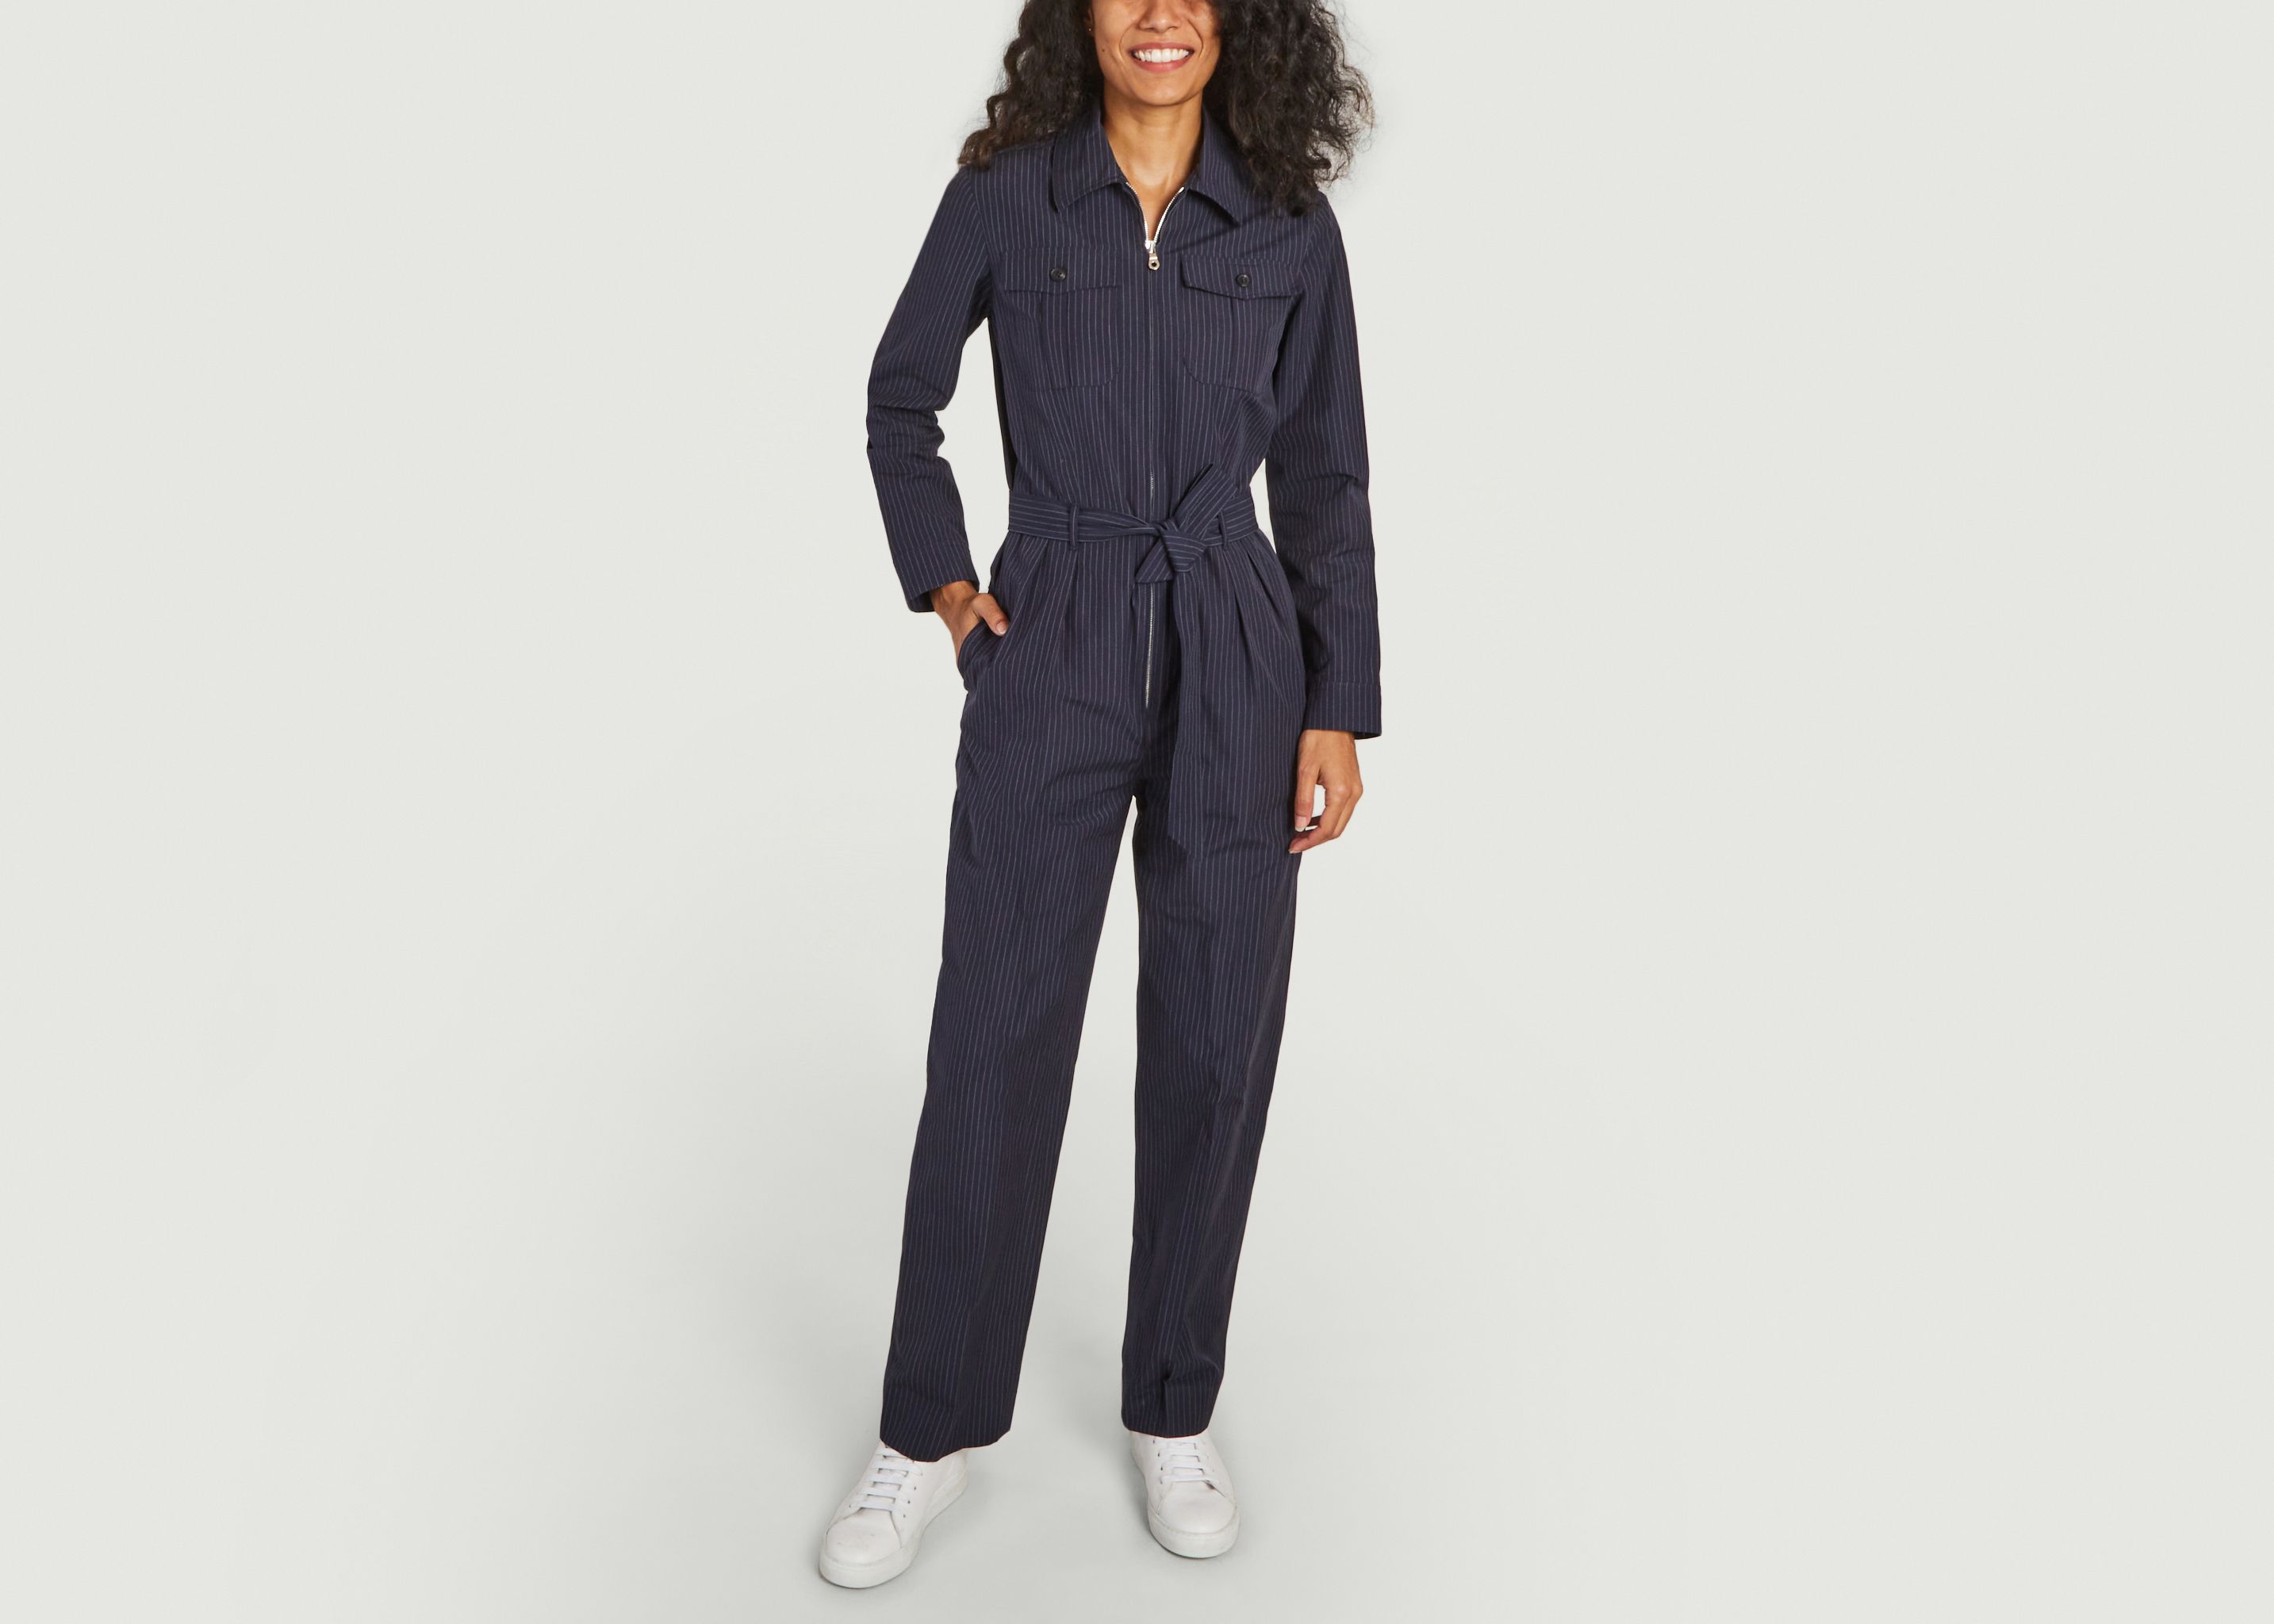 Clementine Overall - A.P.C.